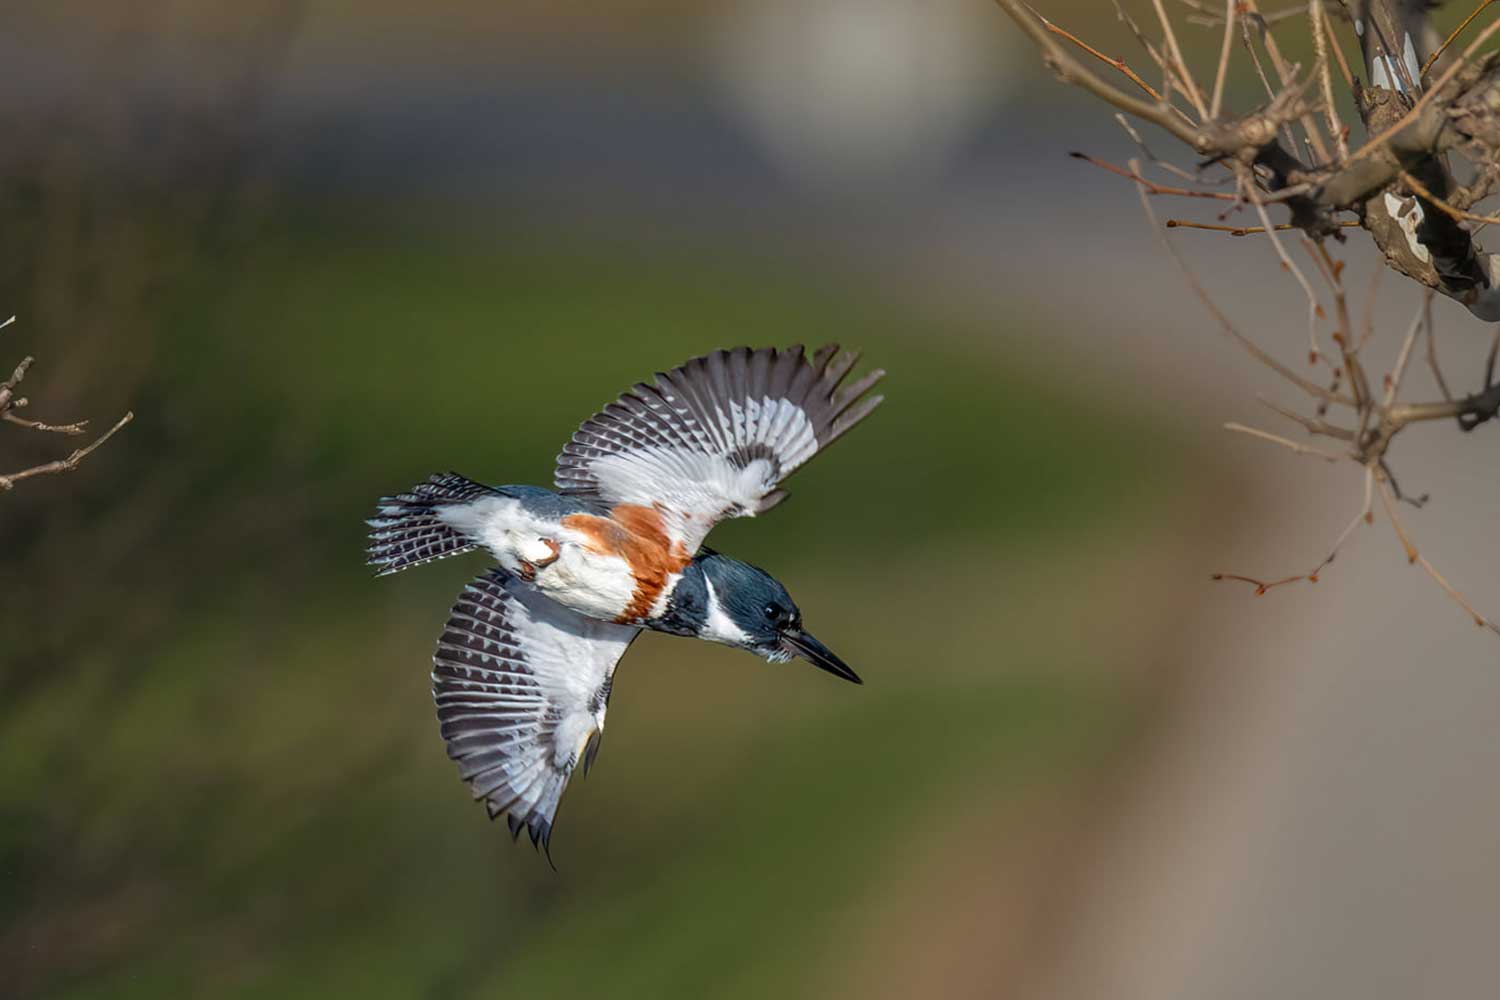 A belted kingfisher in flight.